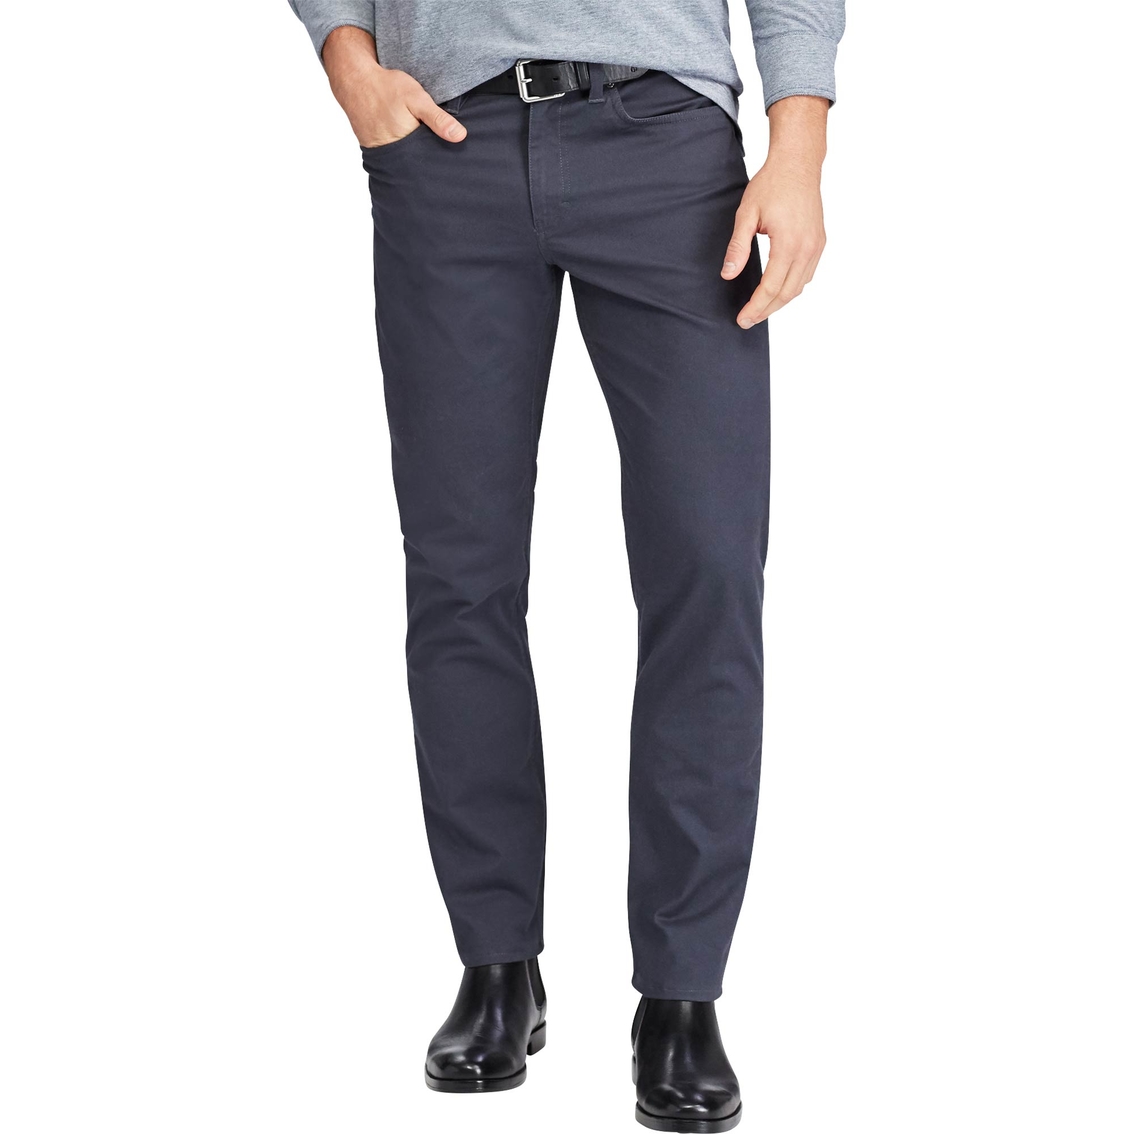 Chaps Straight Fit Stretch Twill 5-pocket Pants | Pants | Father's Day ...